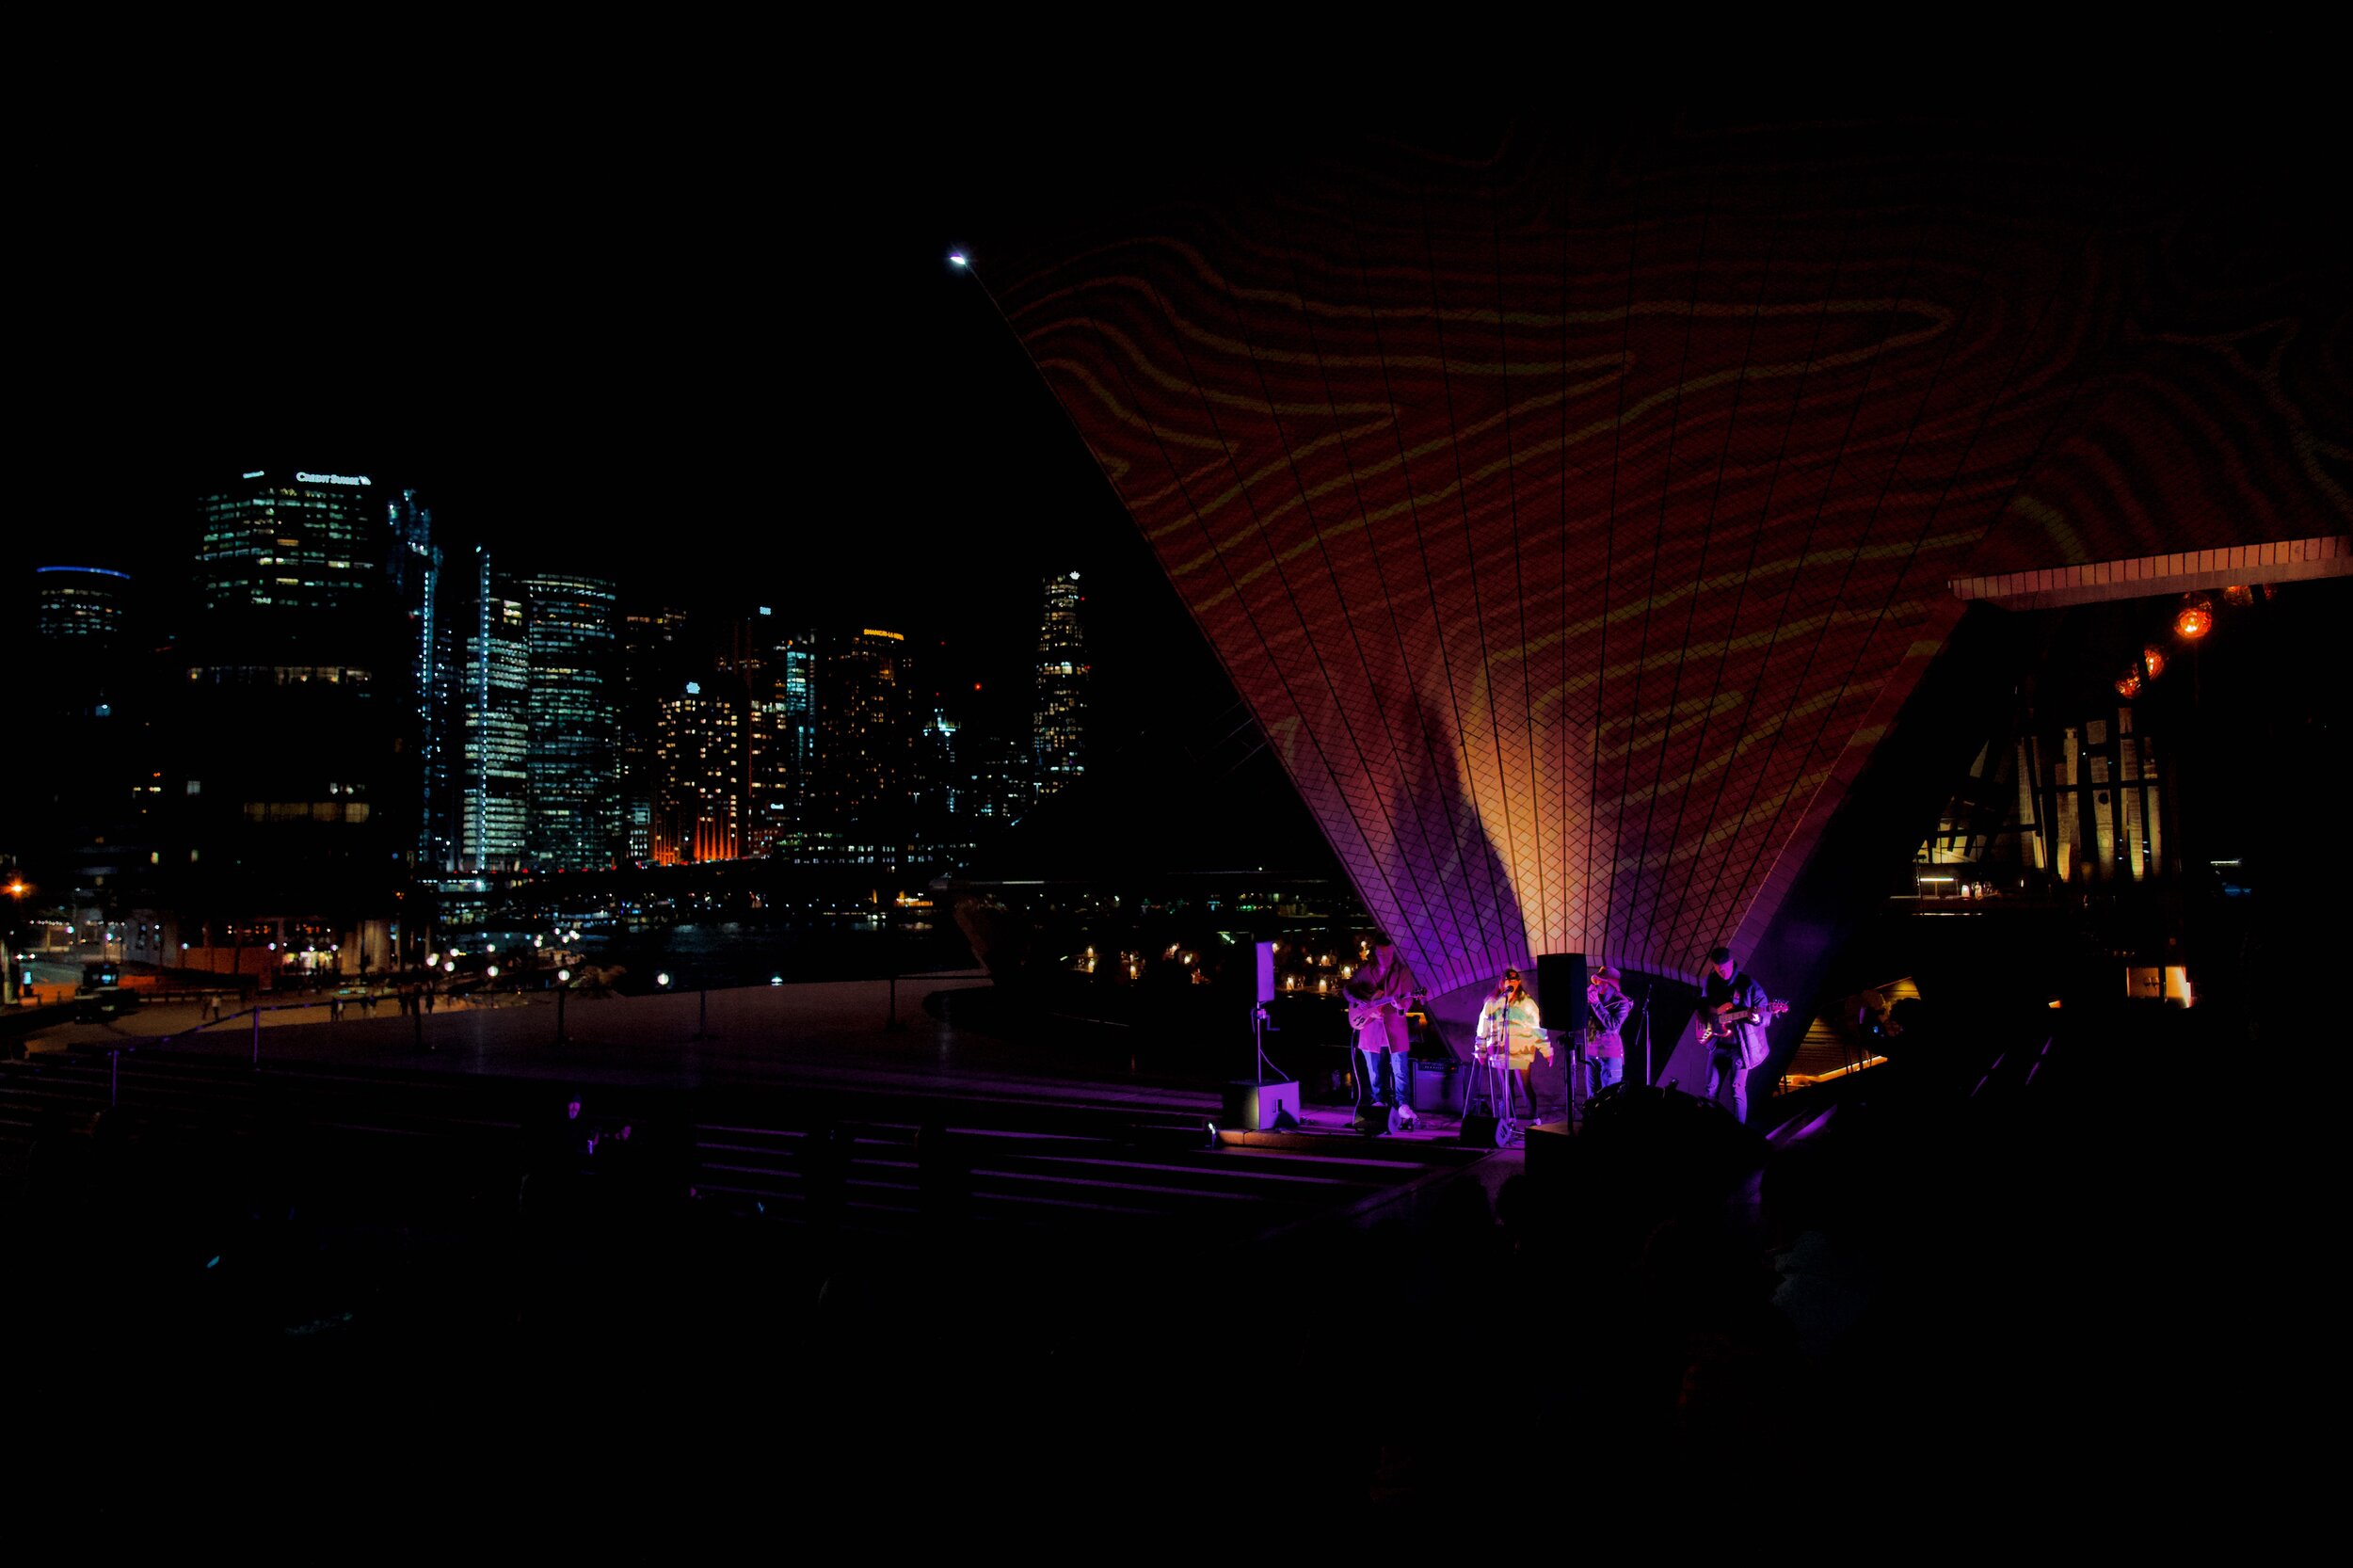 Srisha performing at the Sydney Opera House, sails lit up by First Nations artists